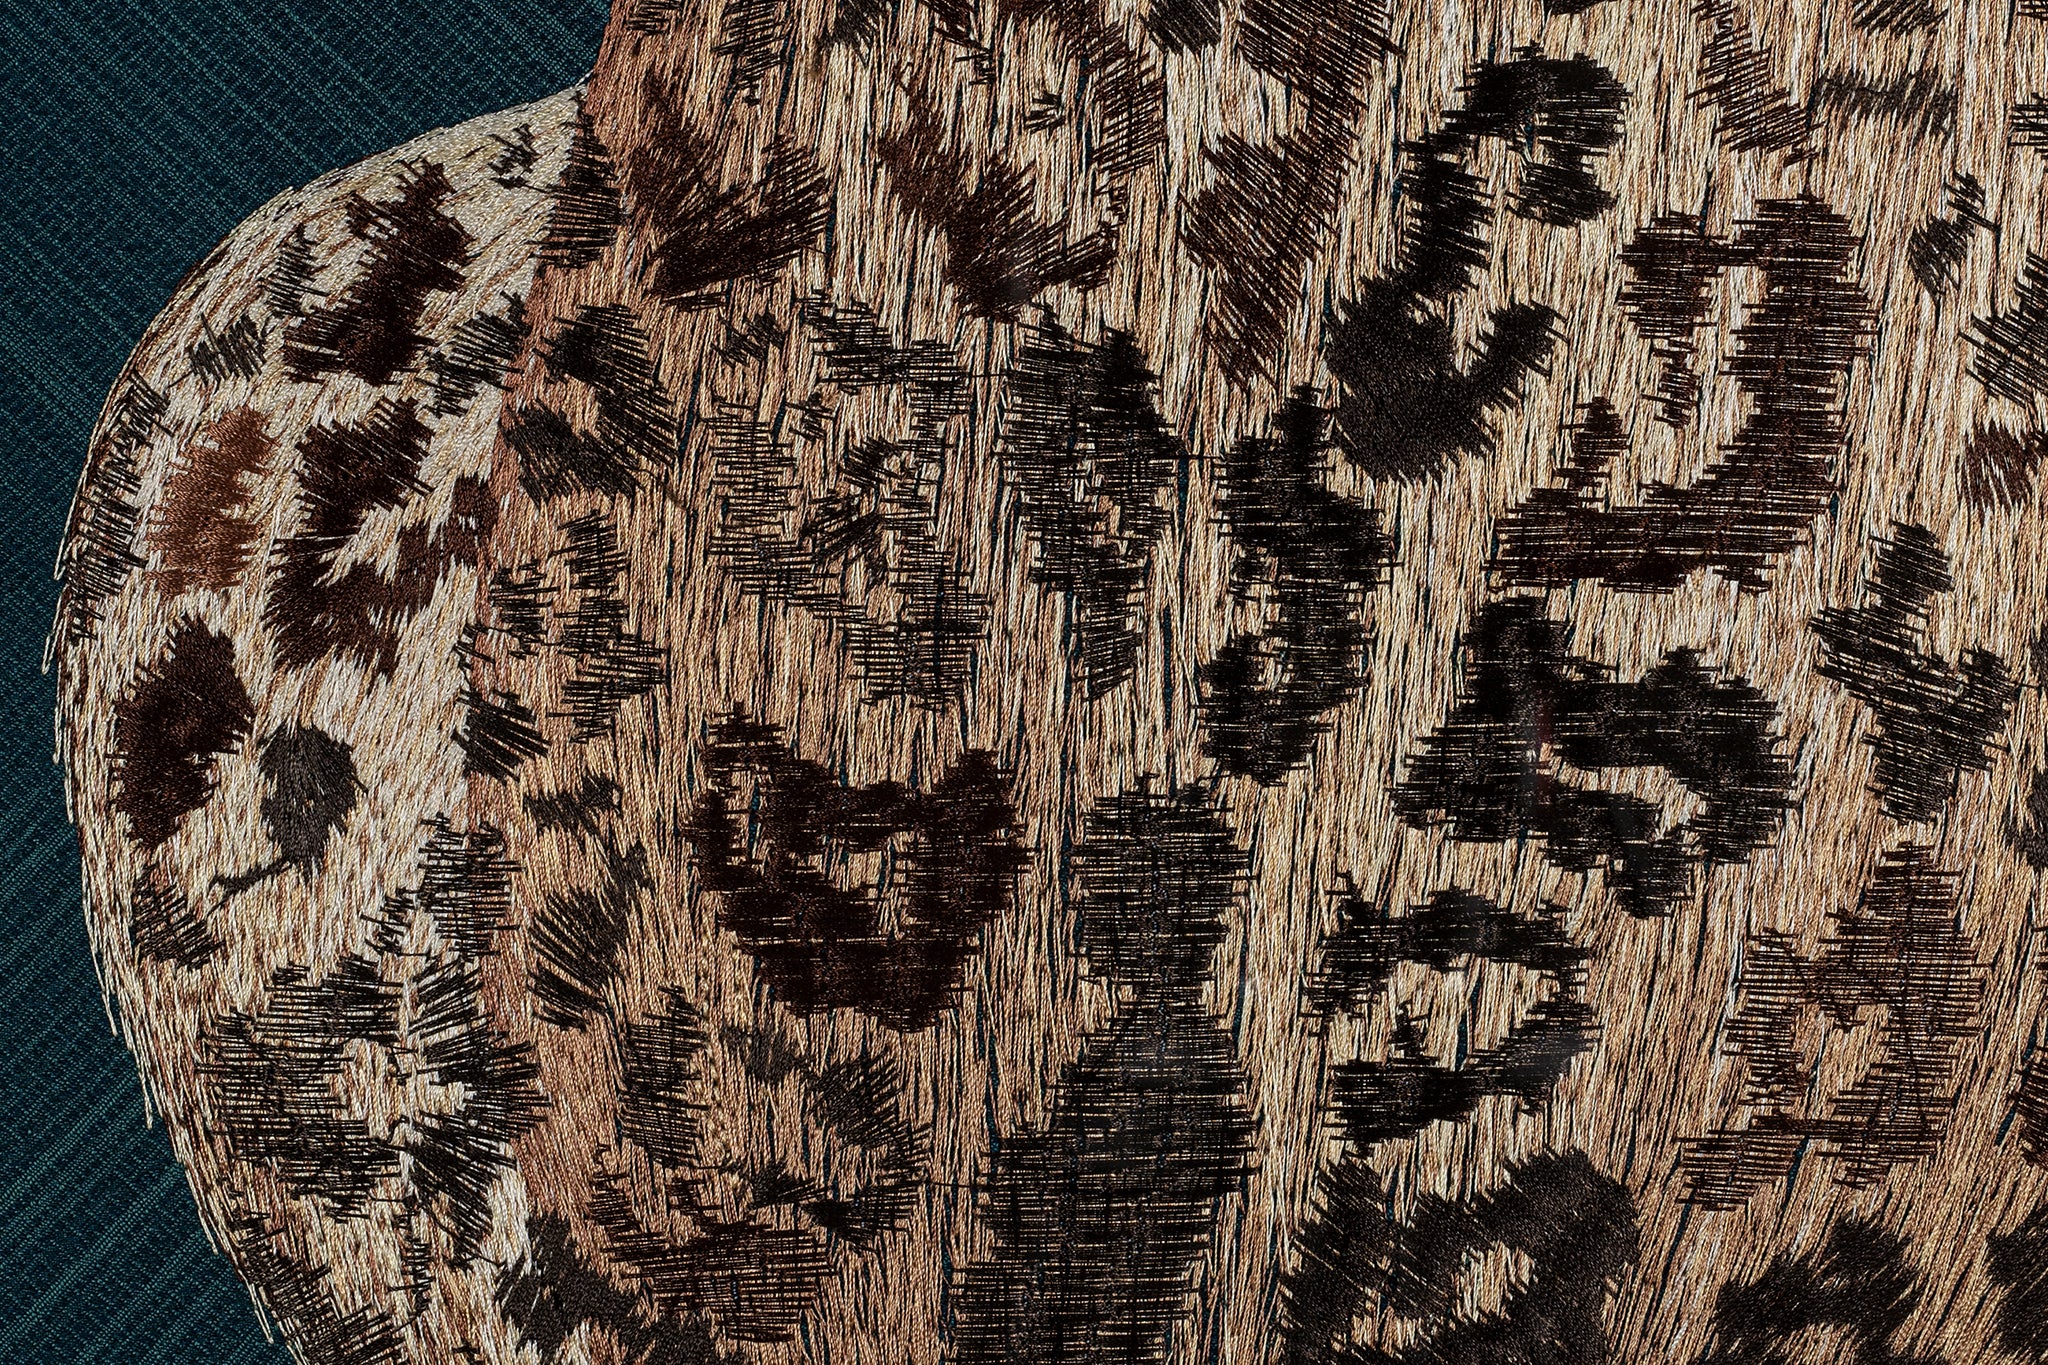 The fur details of the leopard design in embroidery fine wall art.